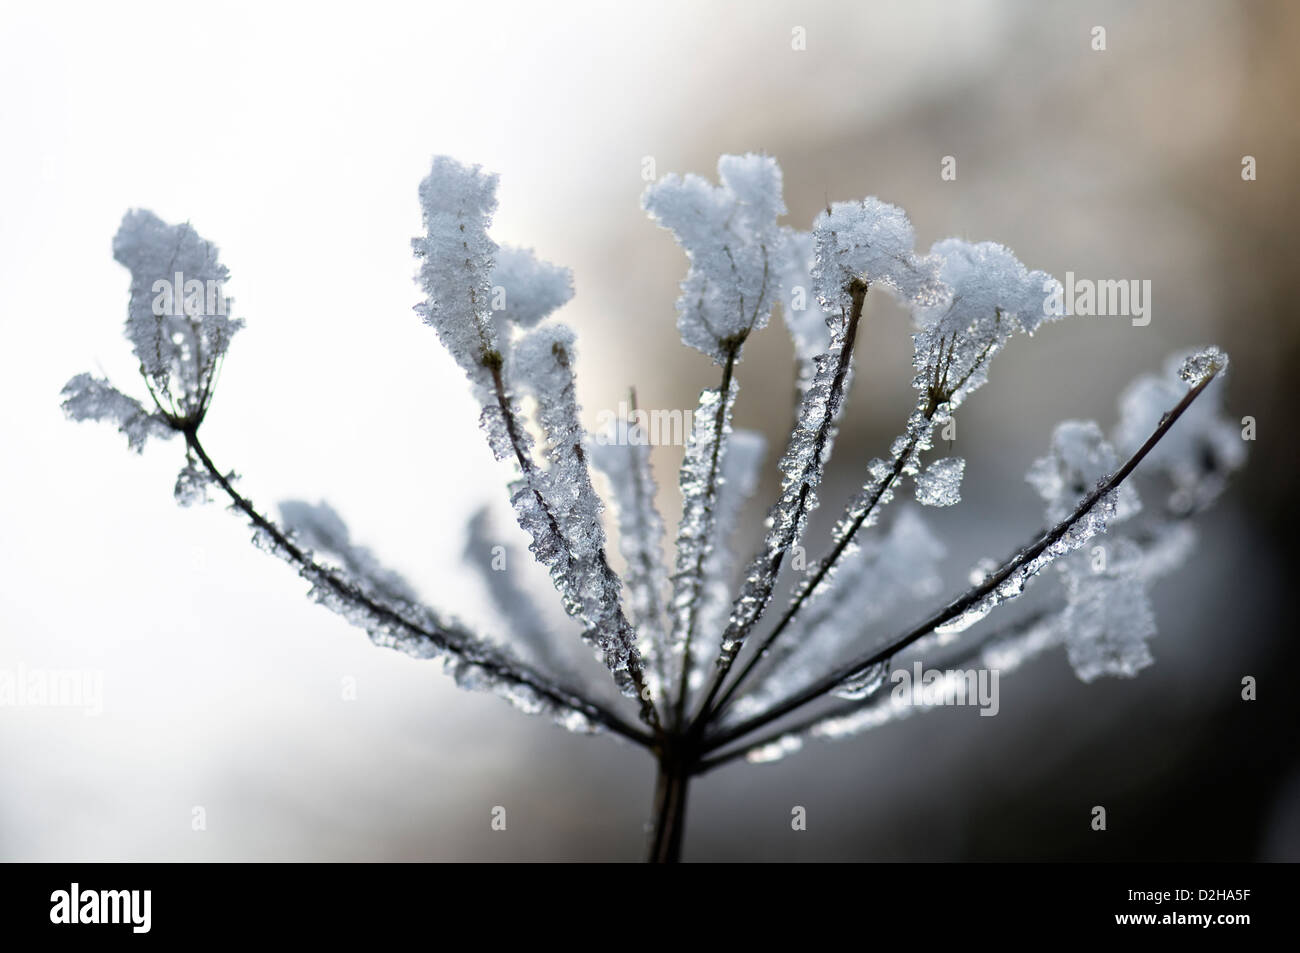 Close up wintry scene of hoar frost on a frozen umbellifer plant showing ice crystals taken at Priddy the Mendips uk Stock Photo